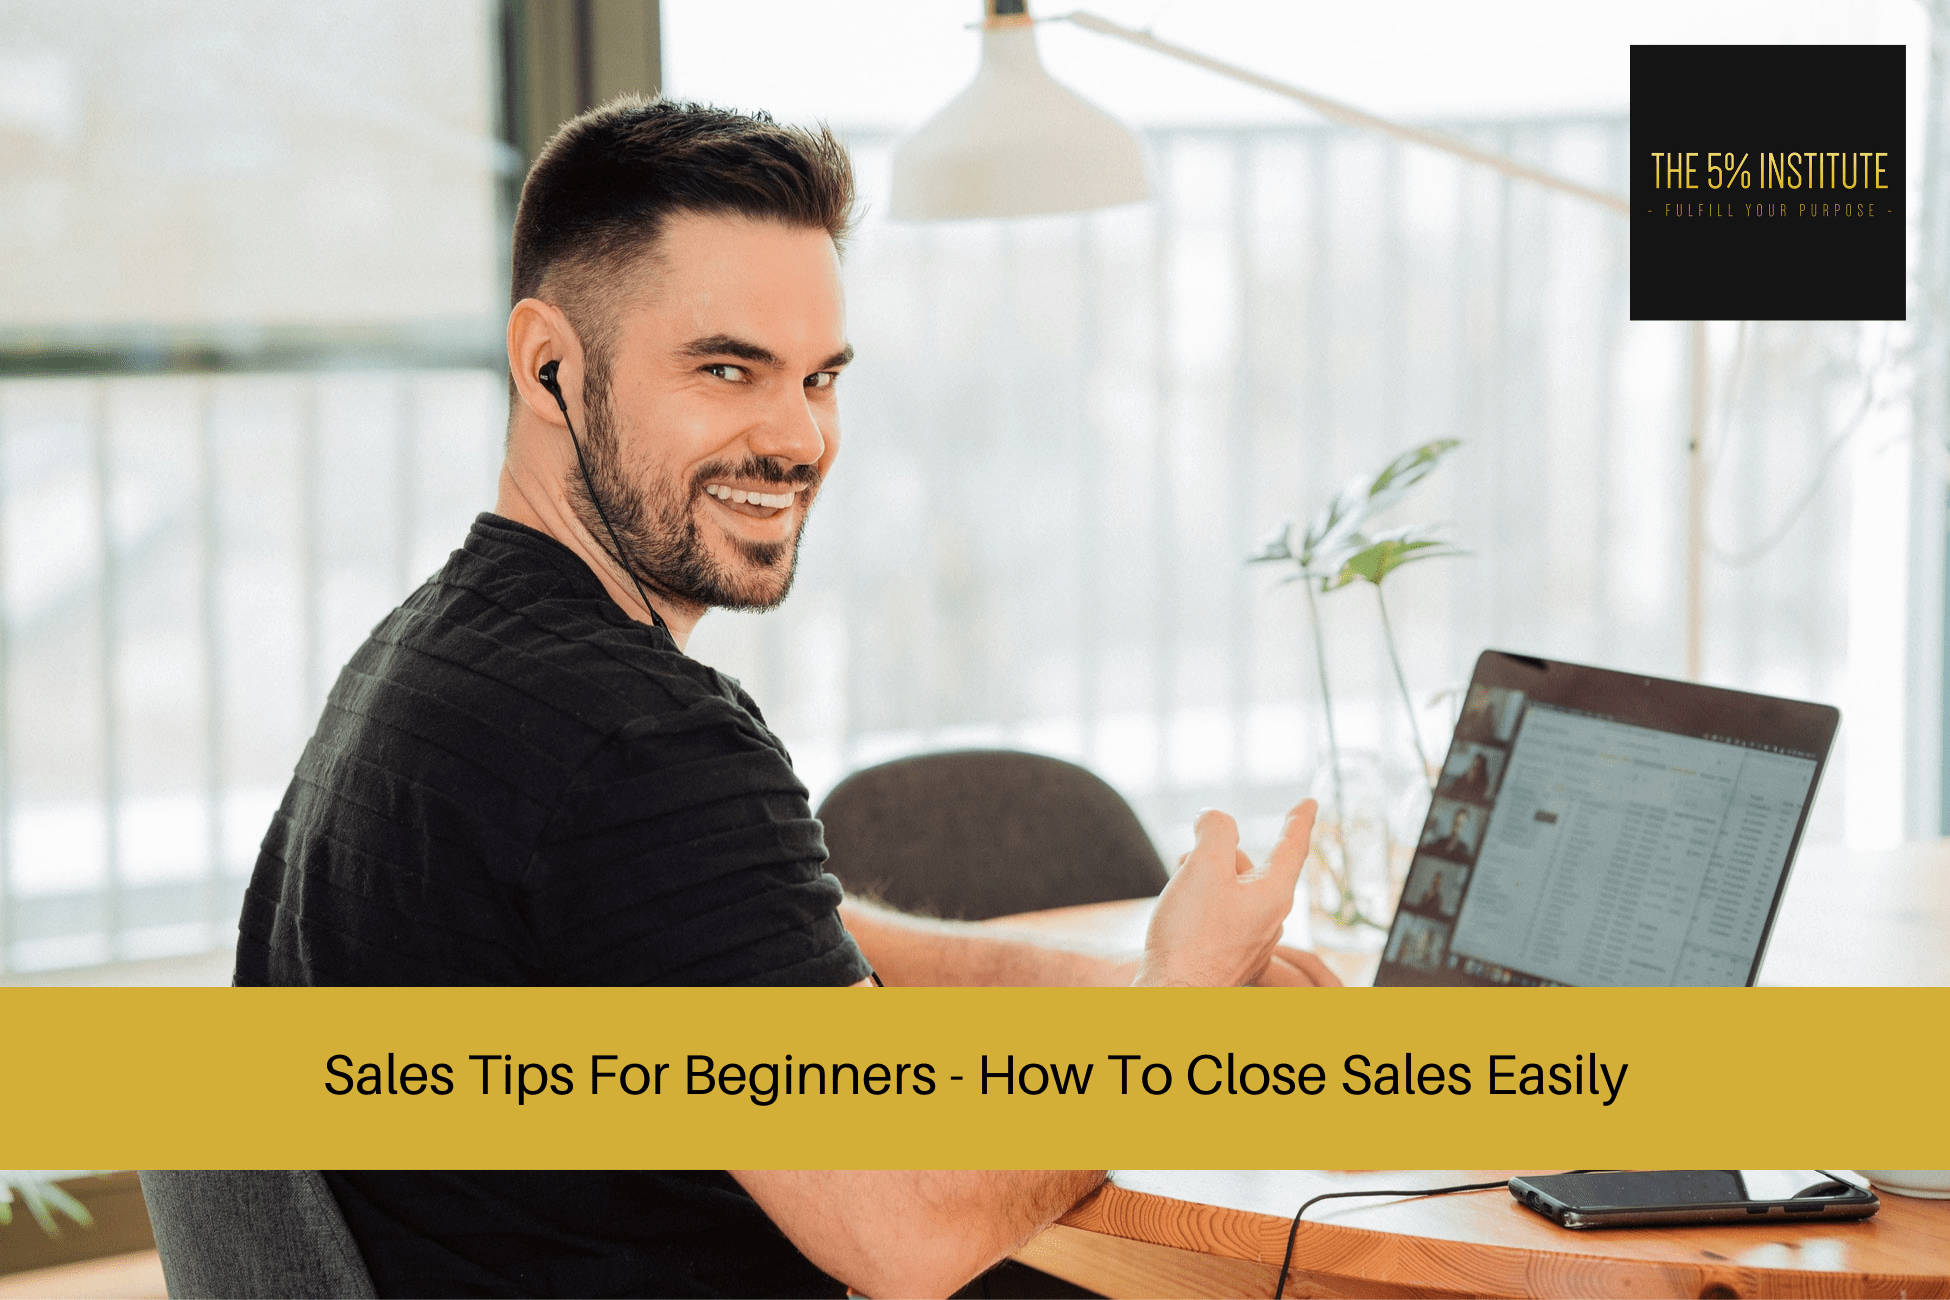 Sales Tips For Beginners - How To Close Sales Easily